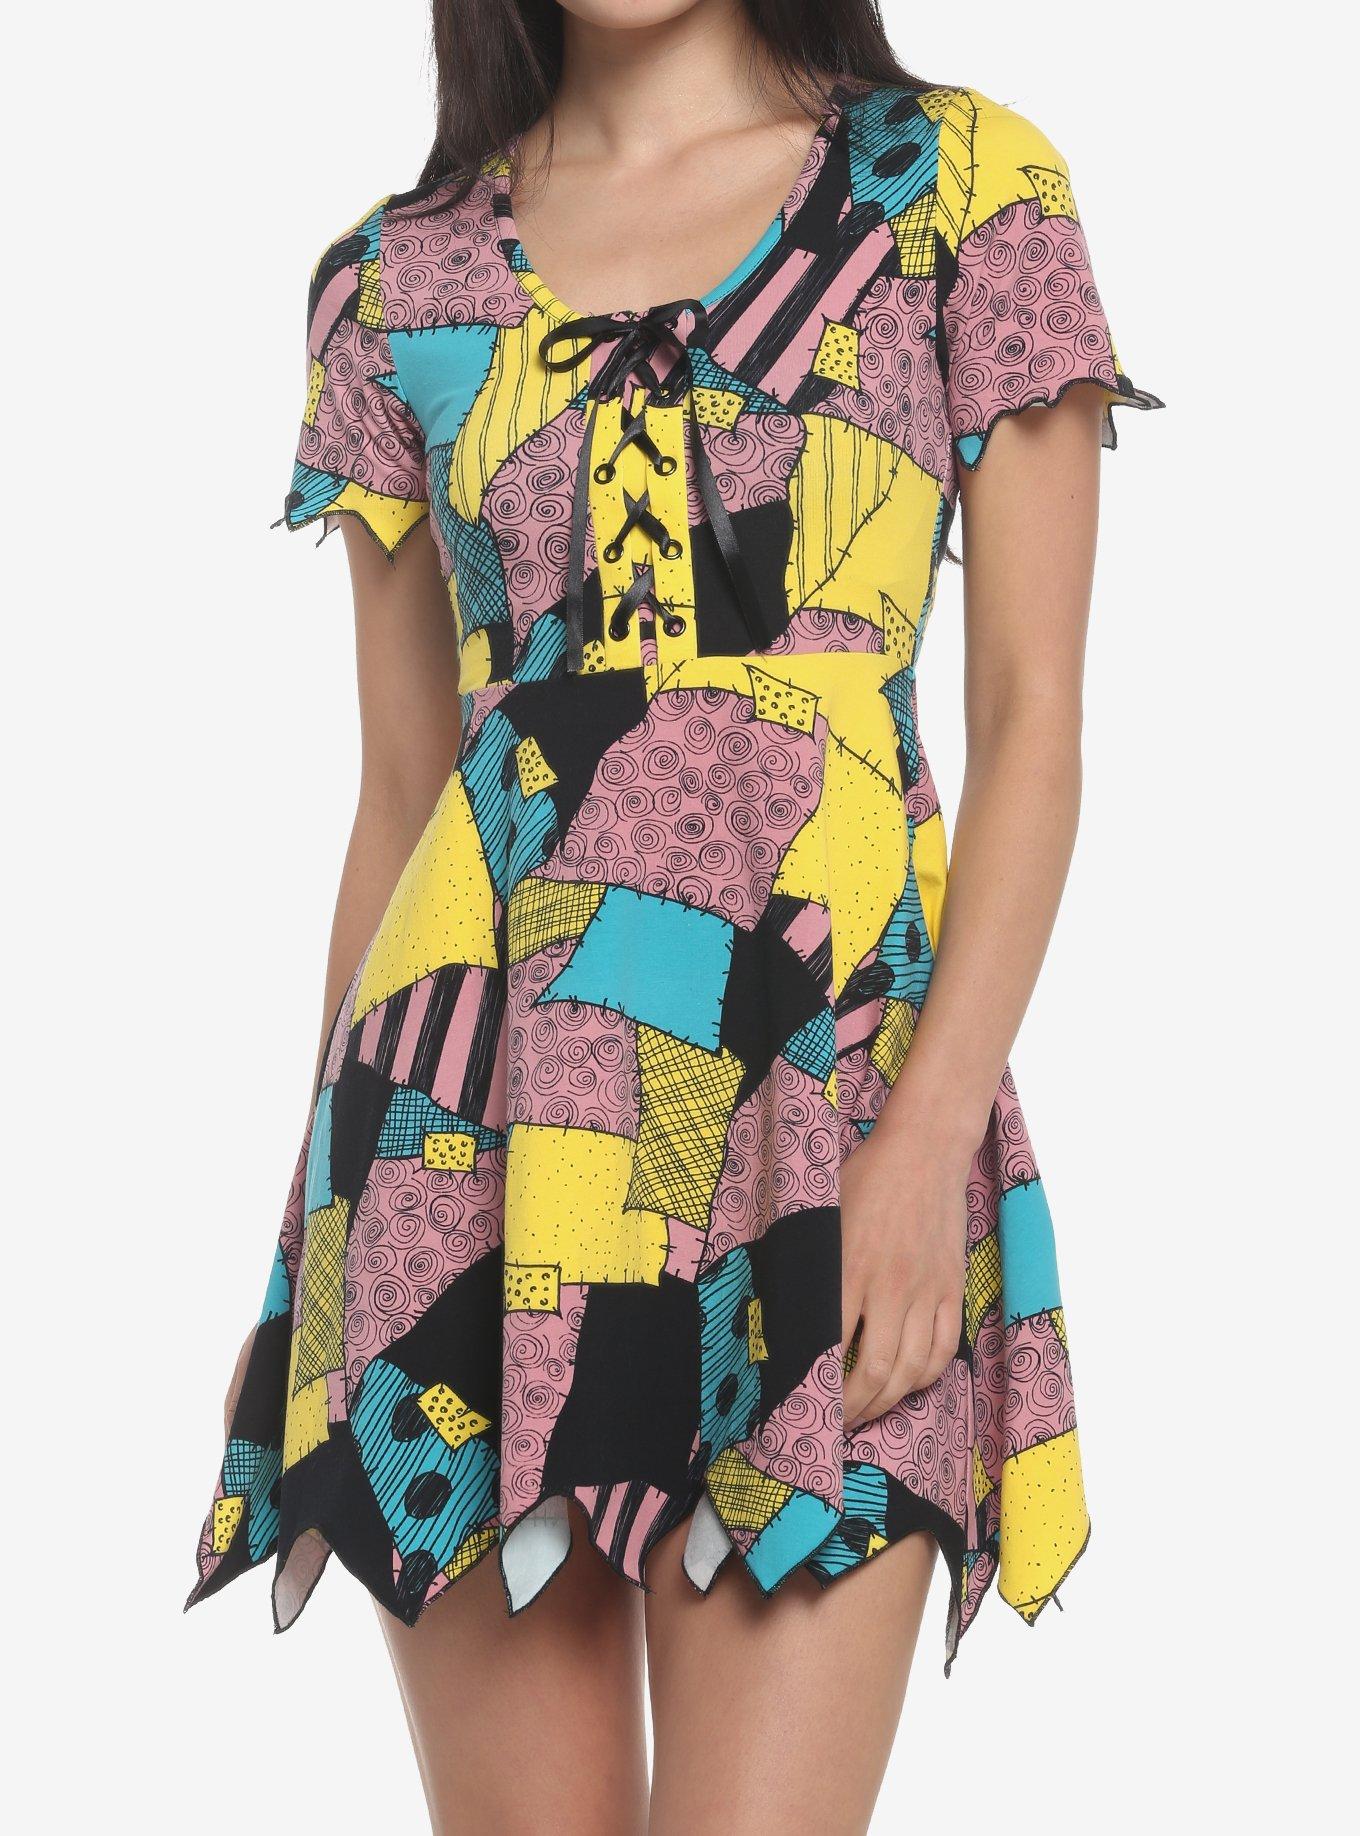 Dapper Day Outfit Ideas | Vintage Disney Dresses The Nightmare Before Christmas Sally Patchwork Jagged Dress $35.92 AT vintagedancer.com